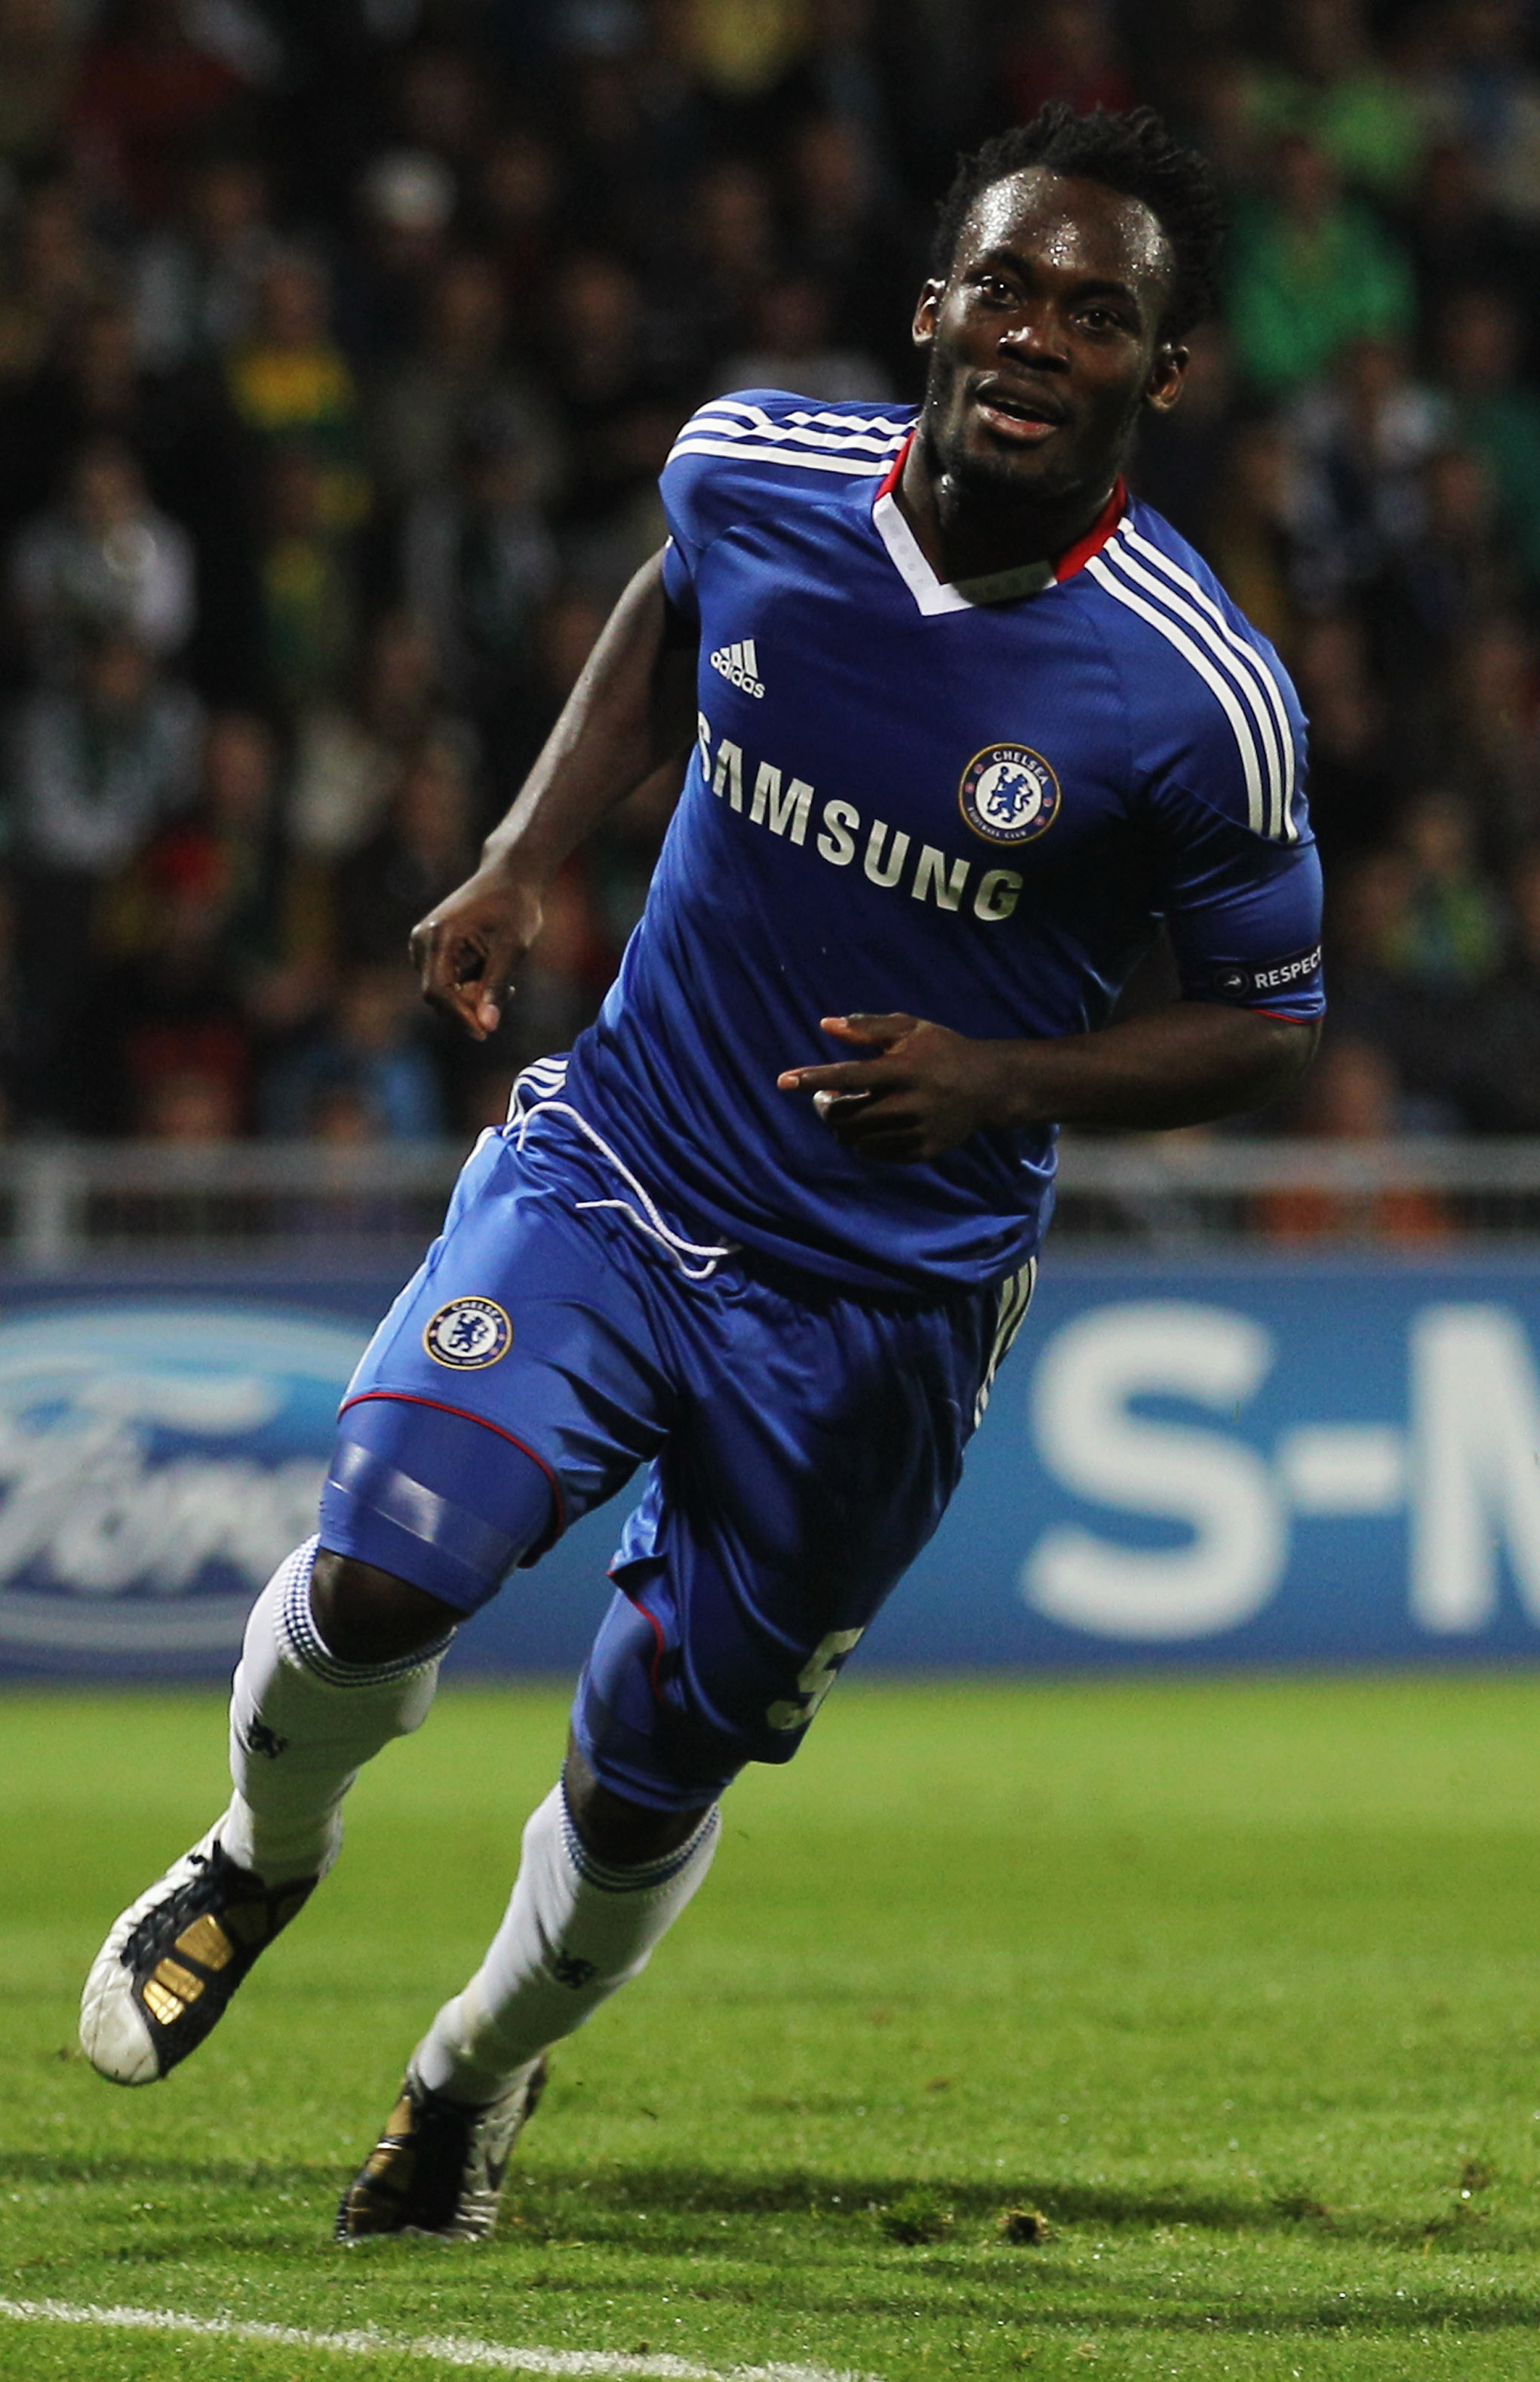 ZILINA, SLOVAKIA - SEPTEMBER 15:  Michael Essien of Chelsea celebrates as he scores their first goal during the UEFA Champions League Group F match between MSK Zilina and Chelsea at the Pod Dubnom Stadium on September 15, 2010 in Zilina, Slovakia.  (Photo